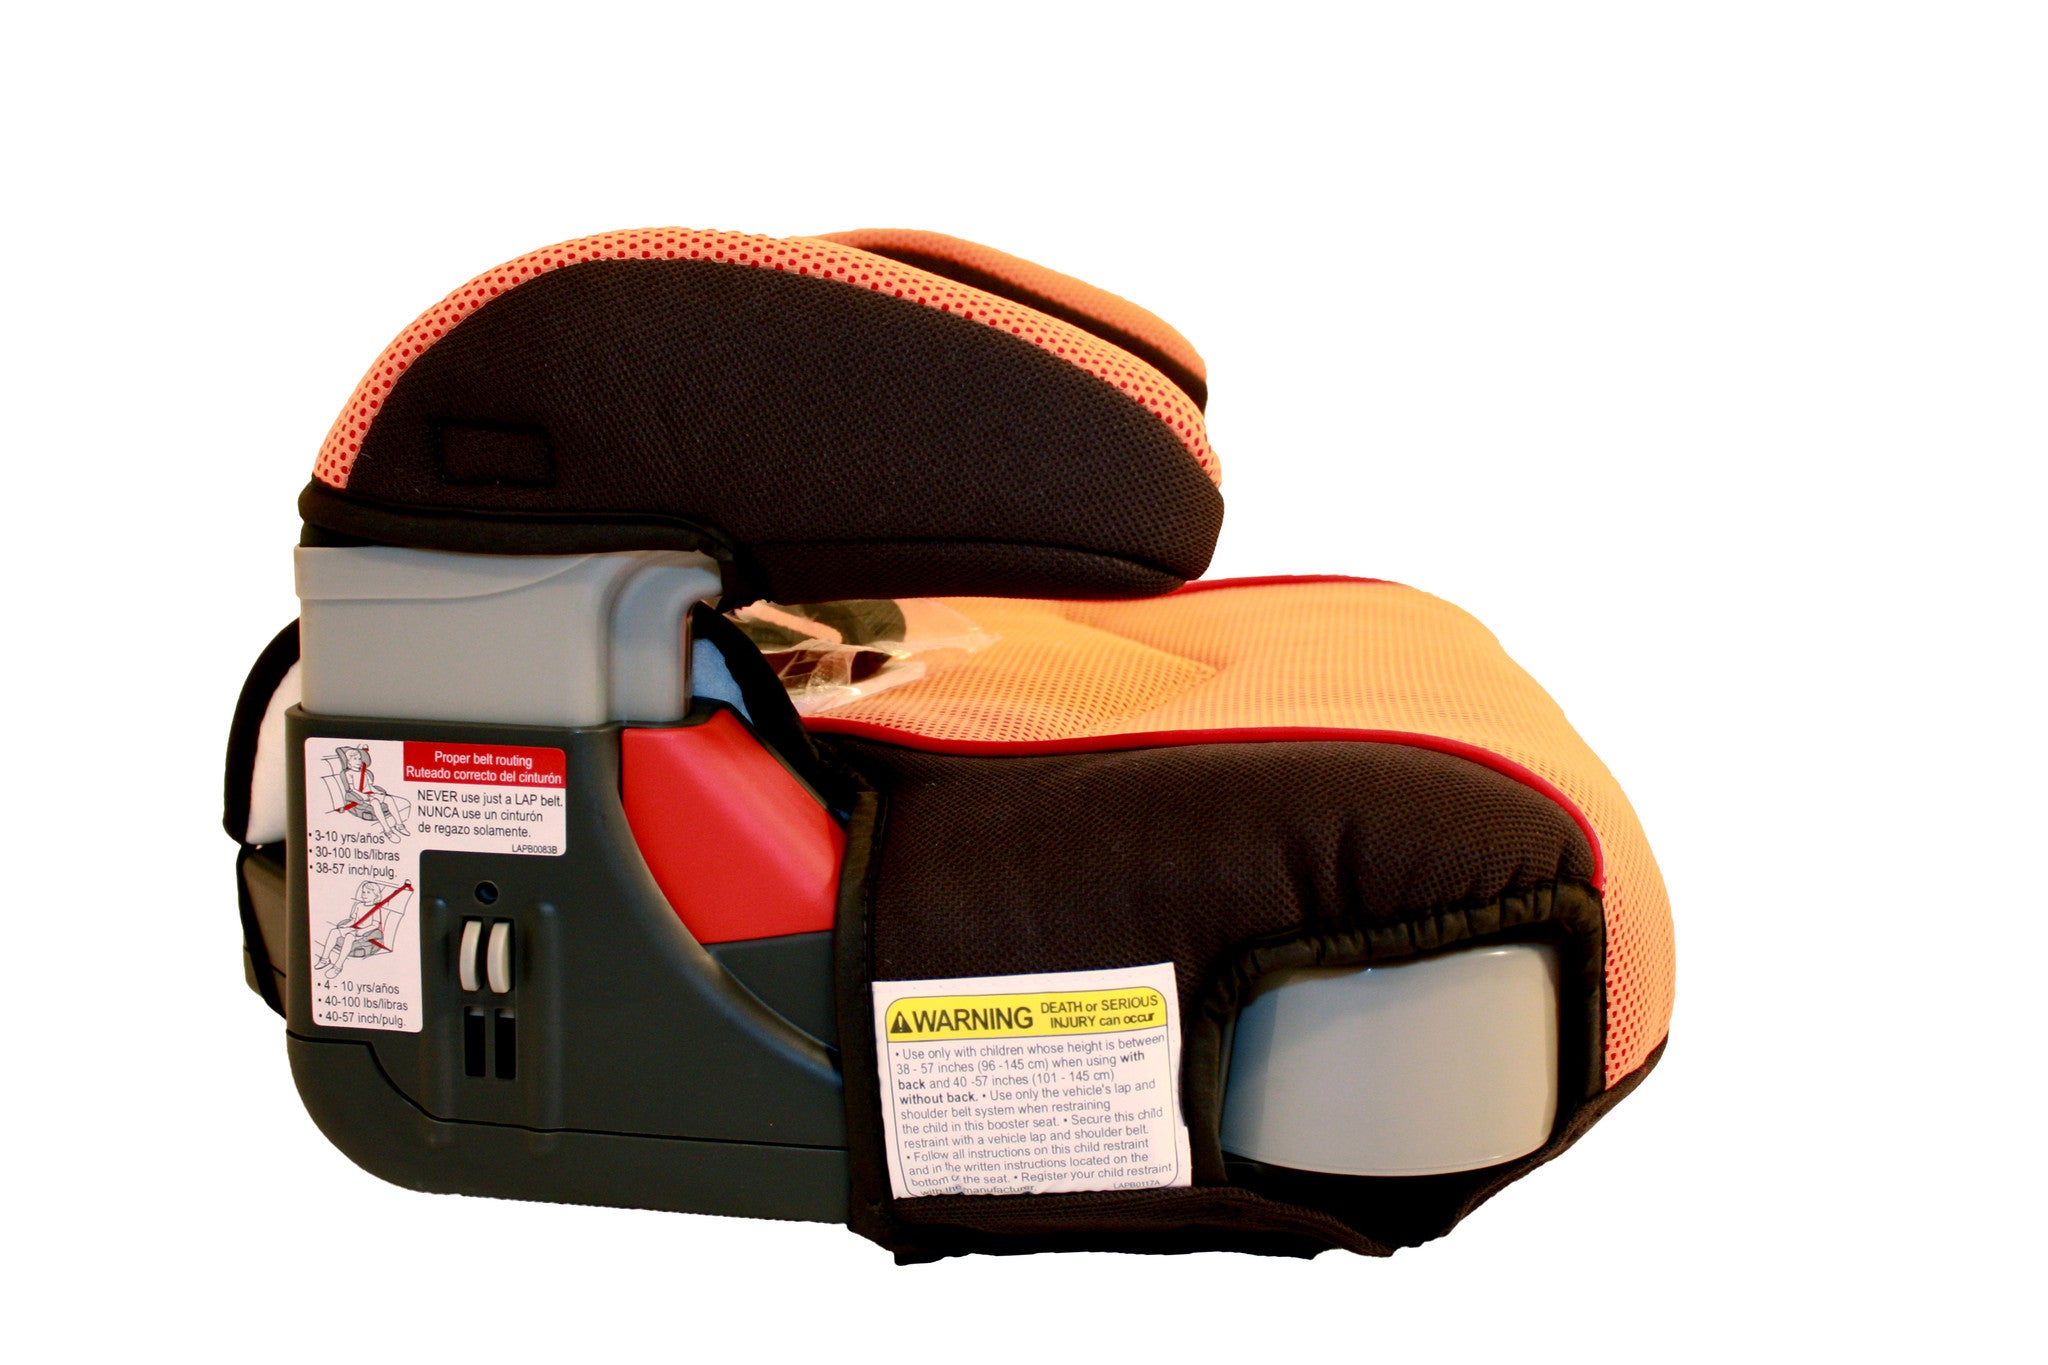 Ingenuity Baby Base 2-in-1 Booster Seat - Cabo Baby Rentals